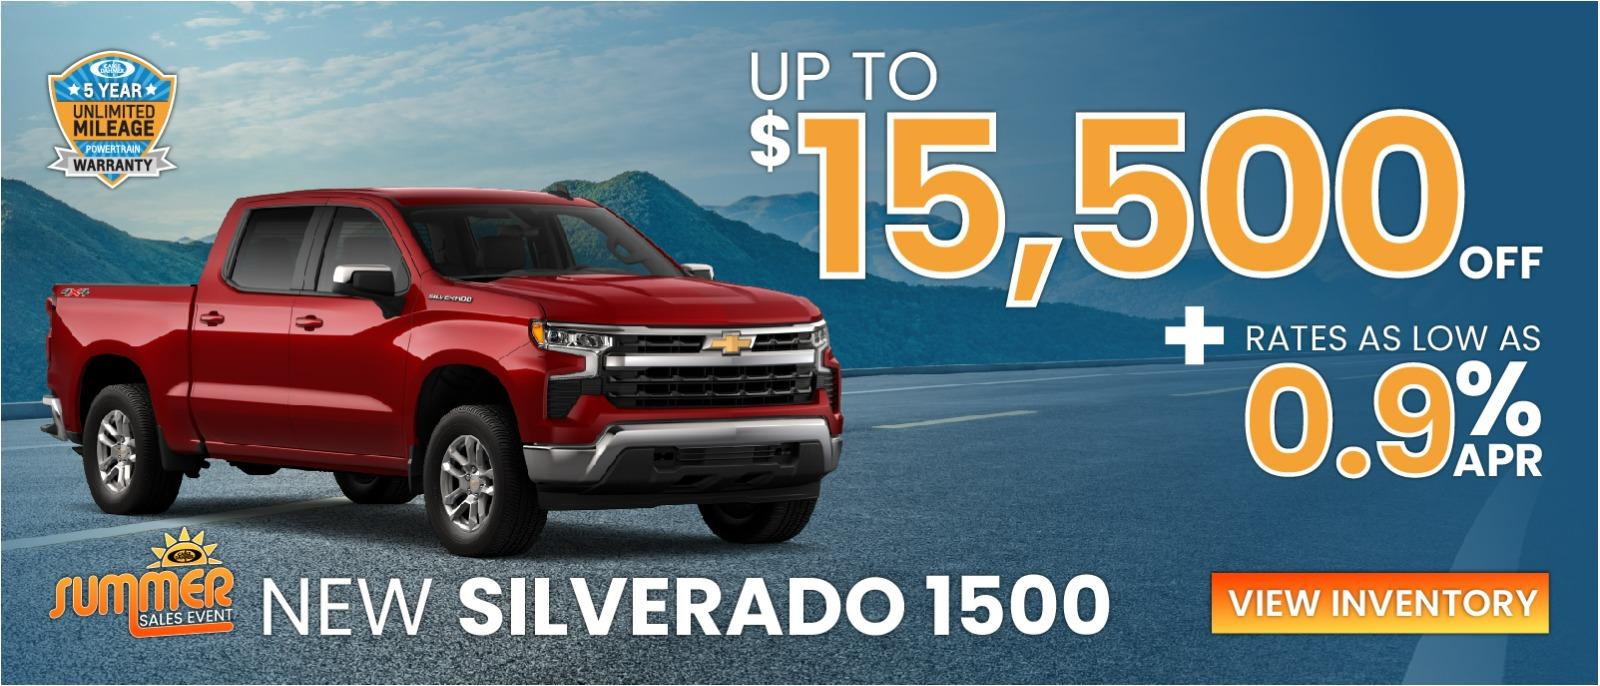 New Chevy Silverado 1500 for up to $11,000 off.